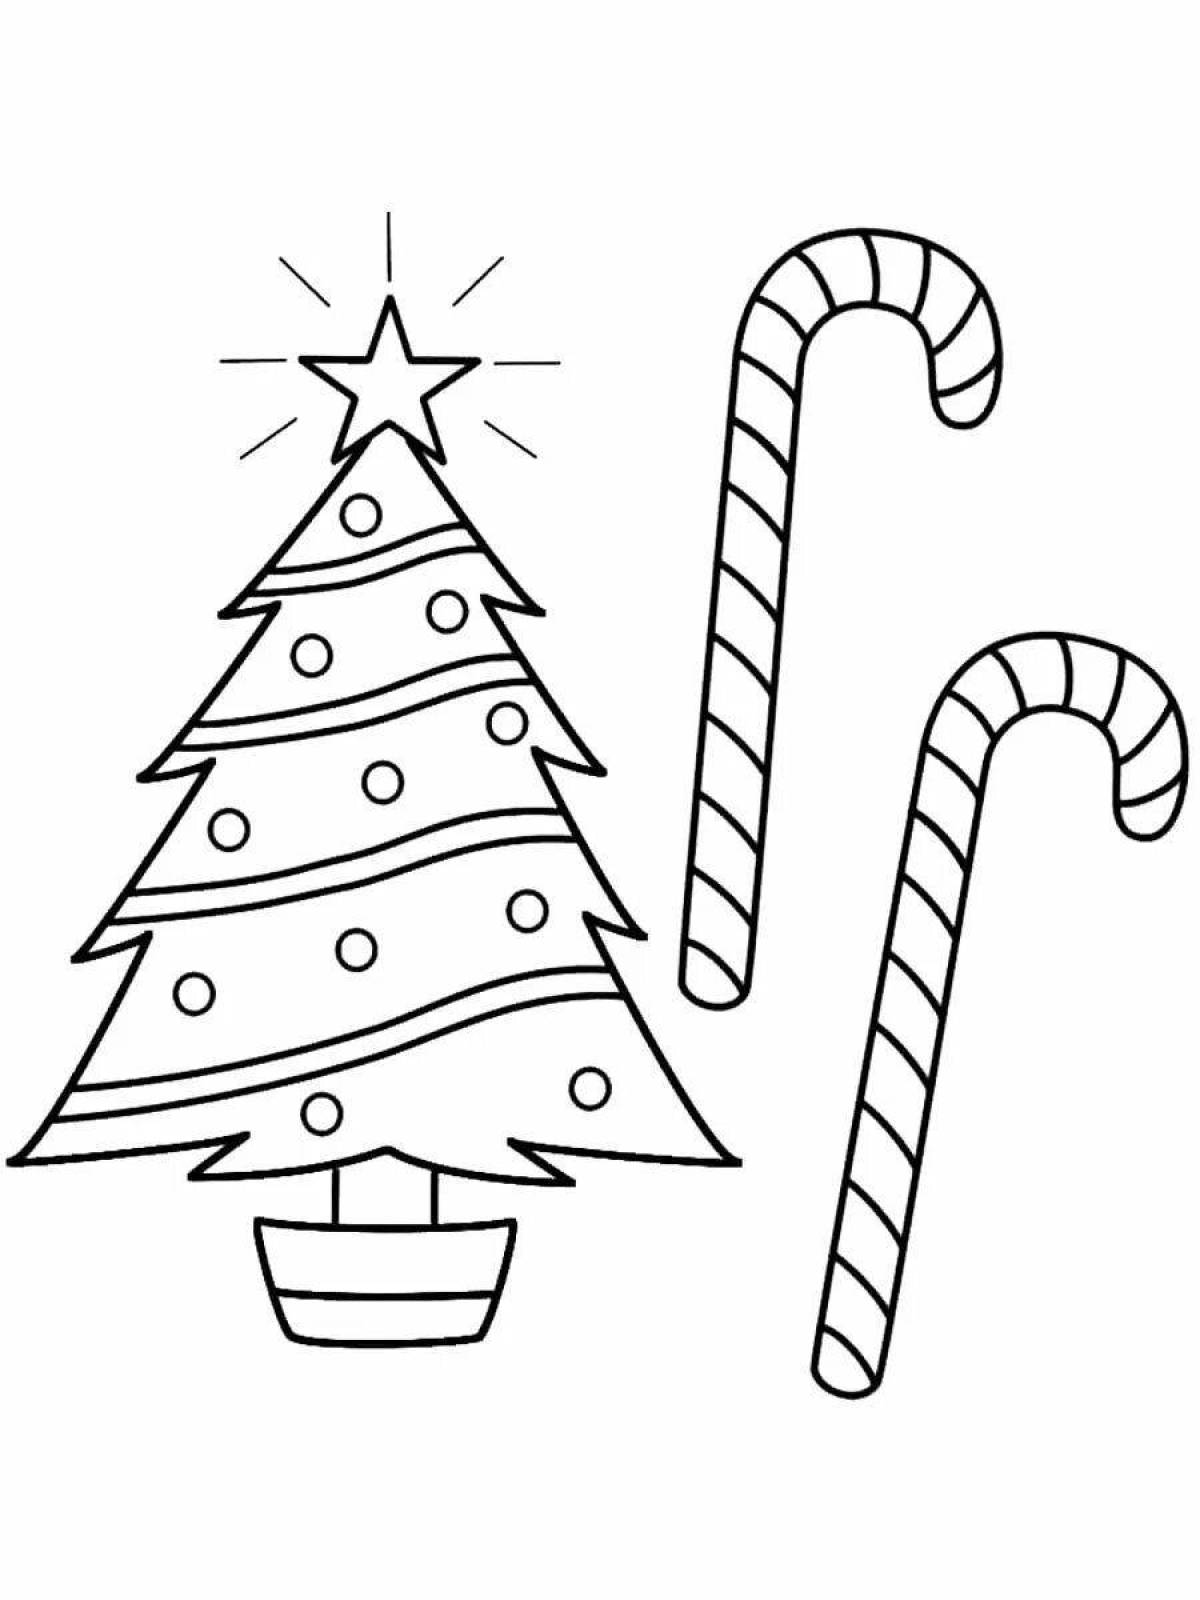 Coloring page magical Christmas cracker